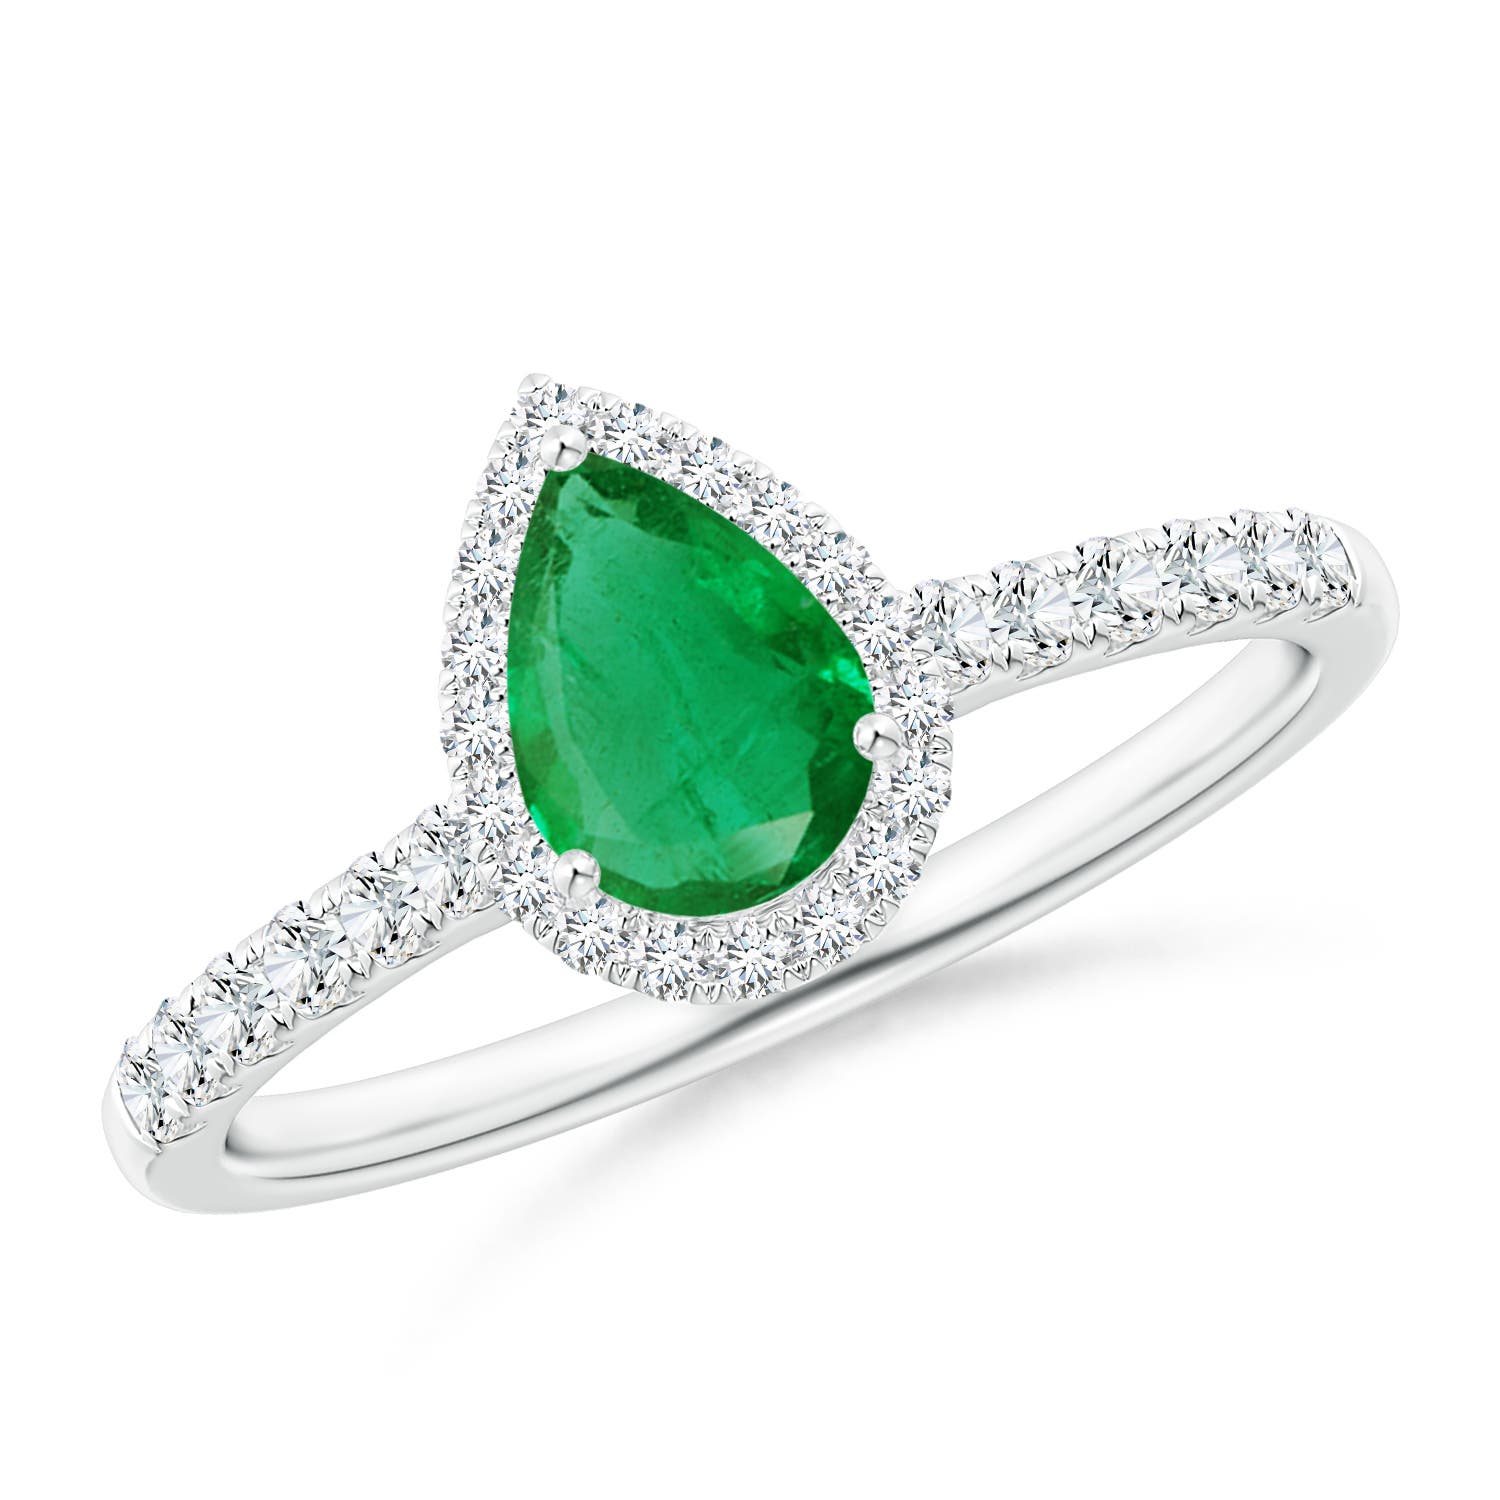 AA - Emerald / 0.88 CT / 14 KT White Gold